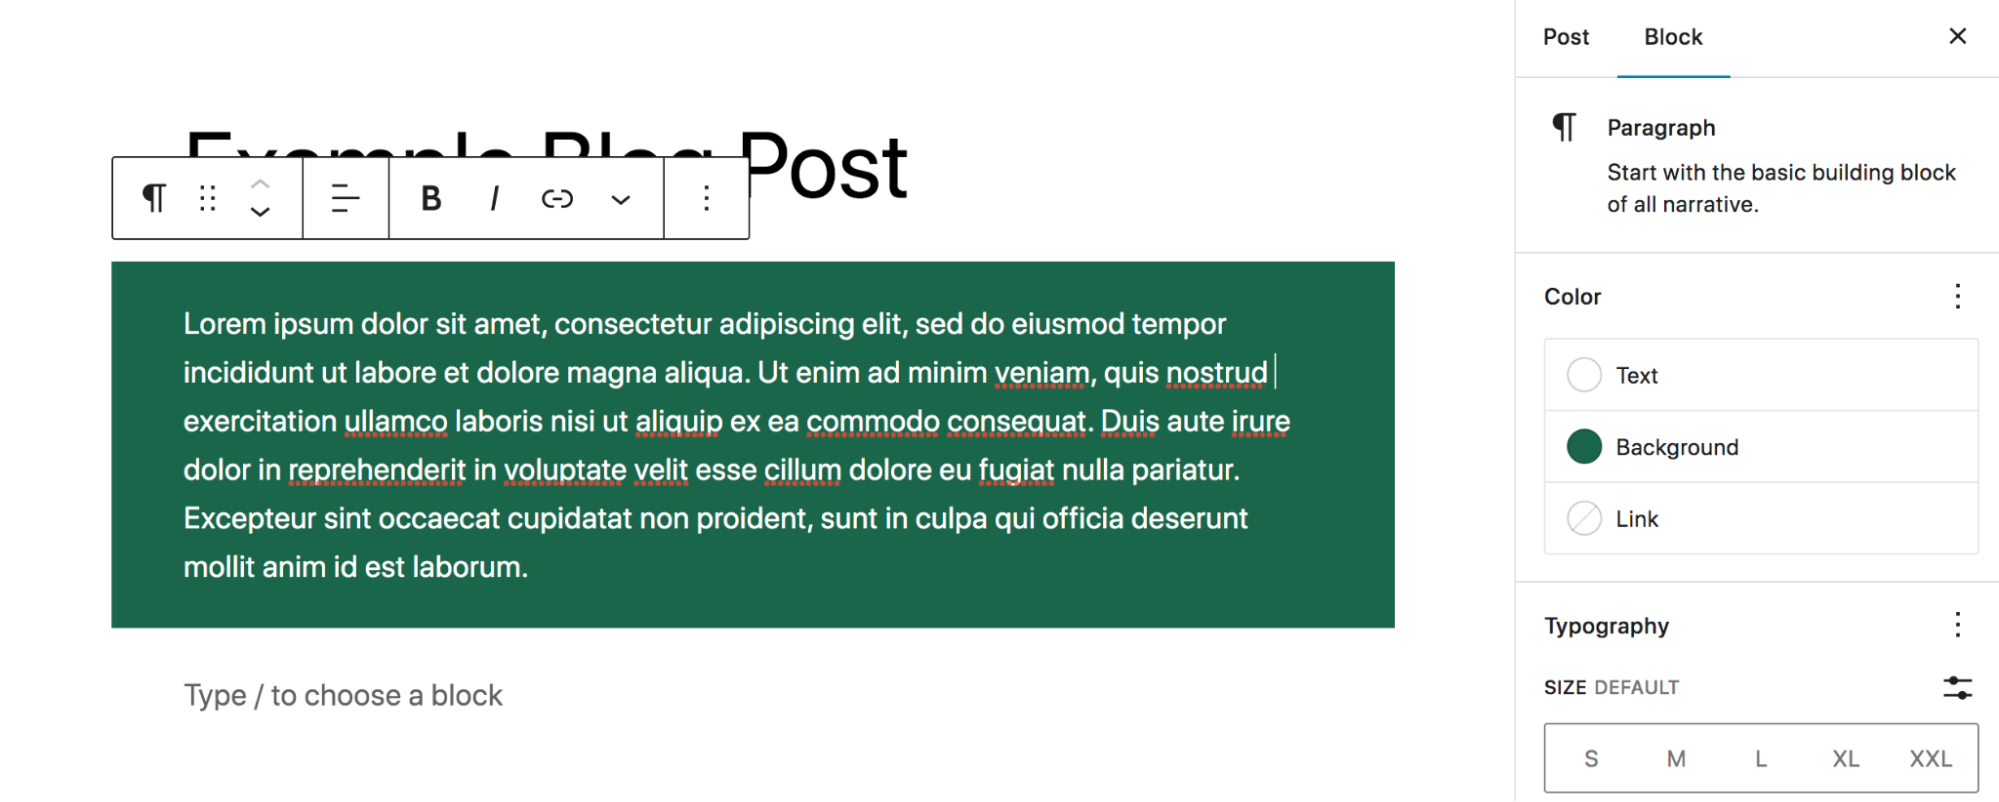 Paragraph block with a green background